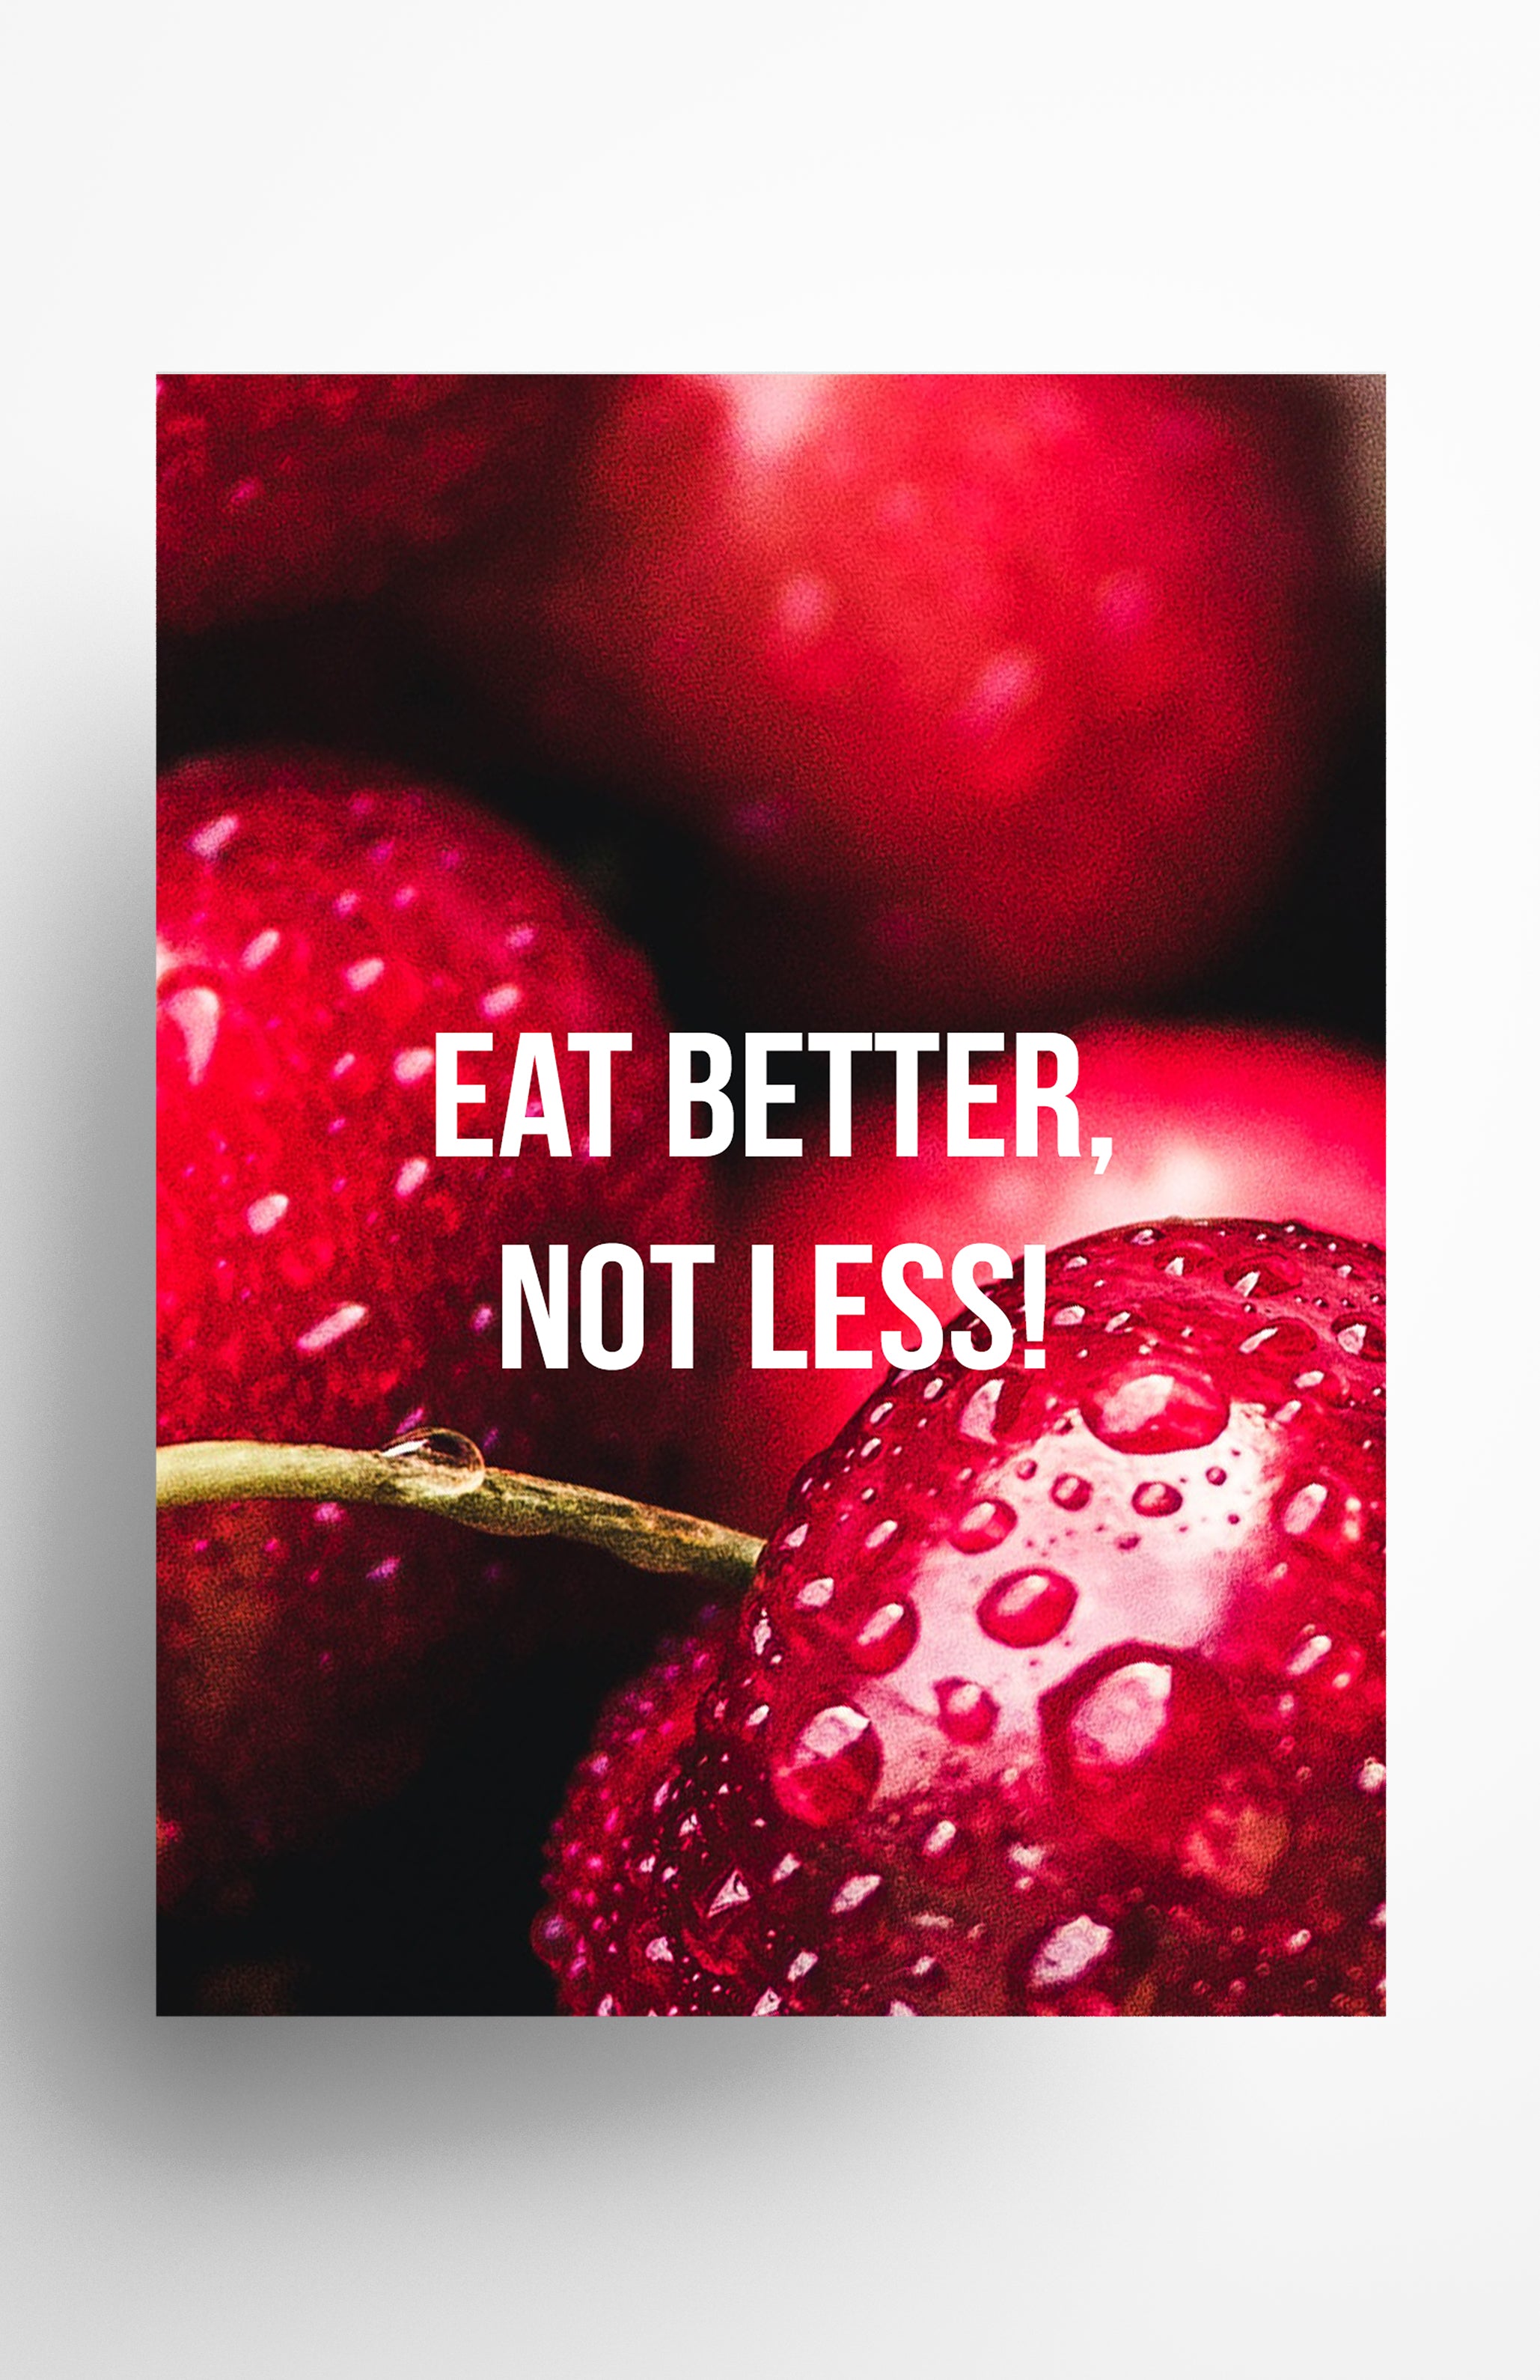 V3 Apparel womens Eat Better Not Less, Motivational posters, mens inspirational wall artwork and empowering poster quote designs for office, home gym, school, kitchen and living room.